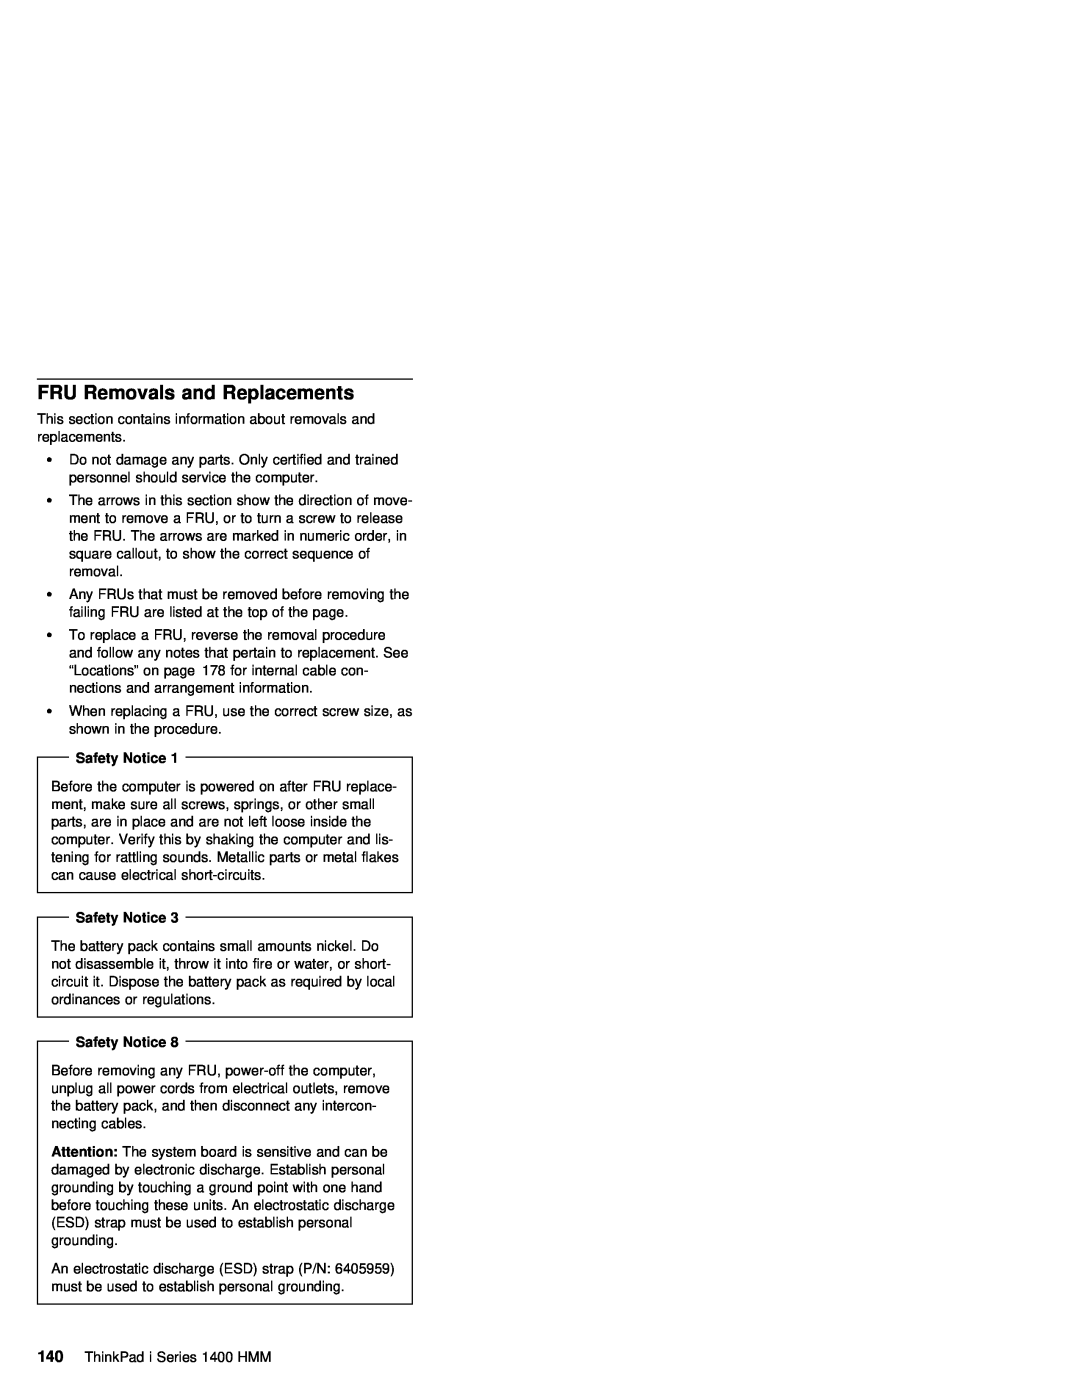 IBM 1400 (2611) manual FRU Removals and Replacements, Safety Notice 